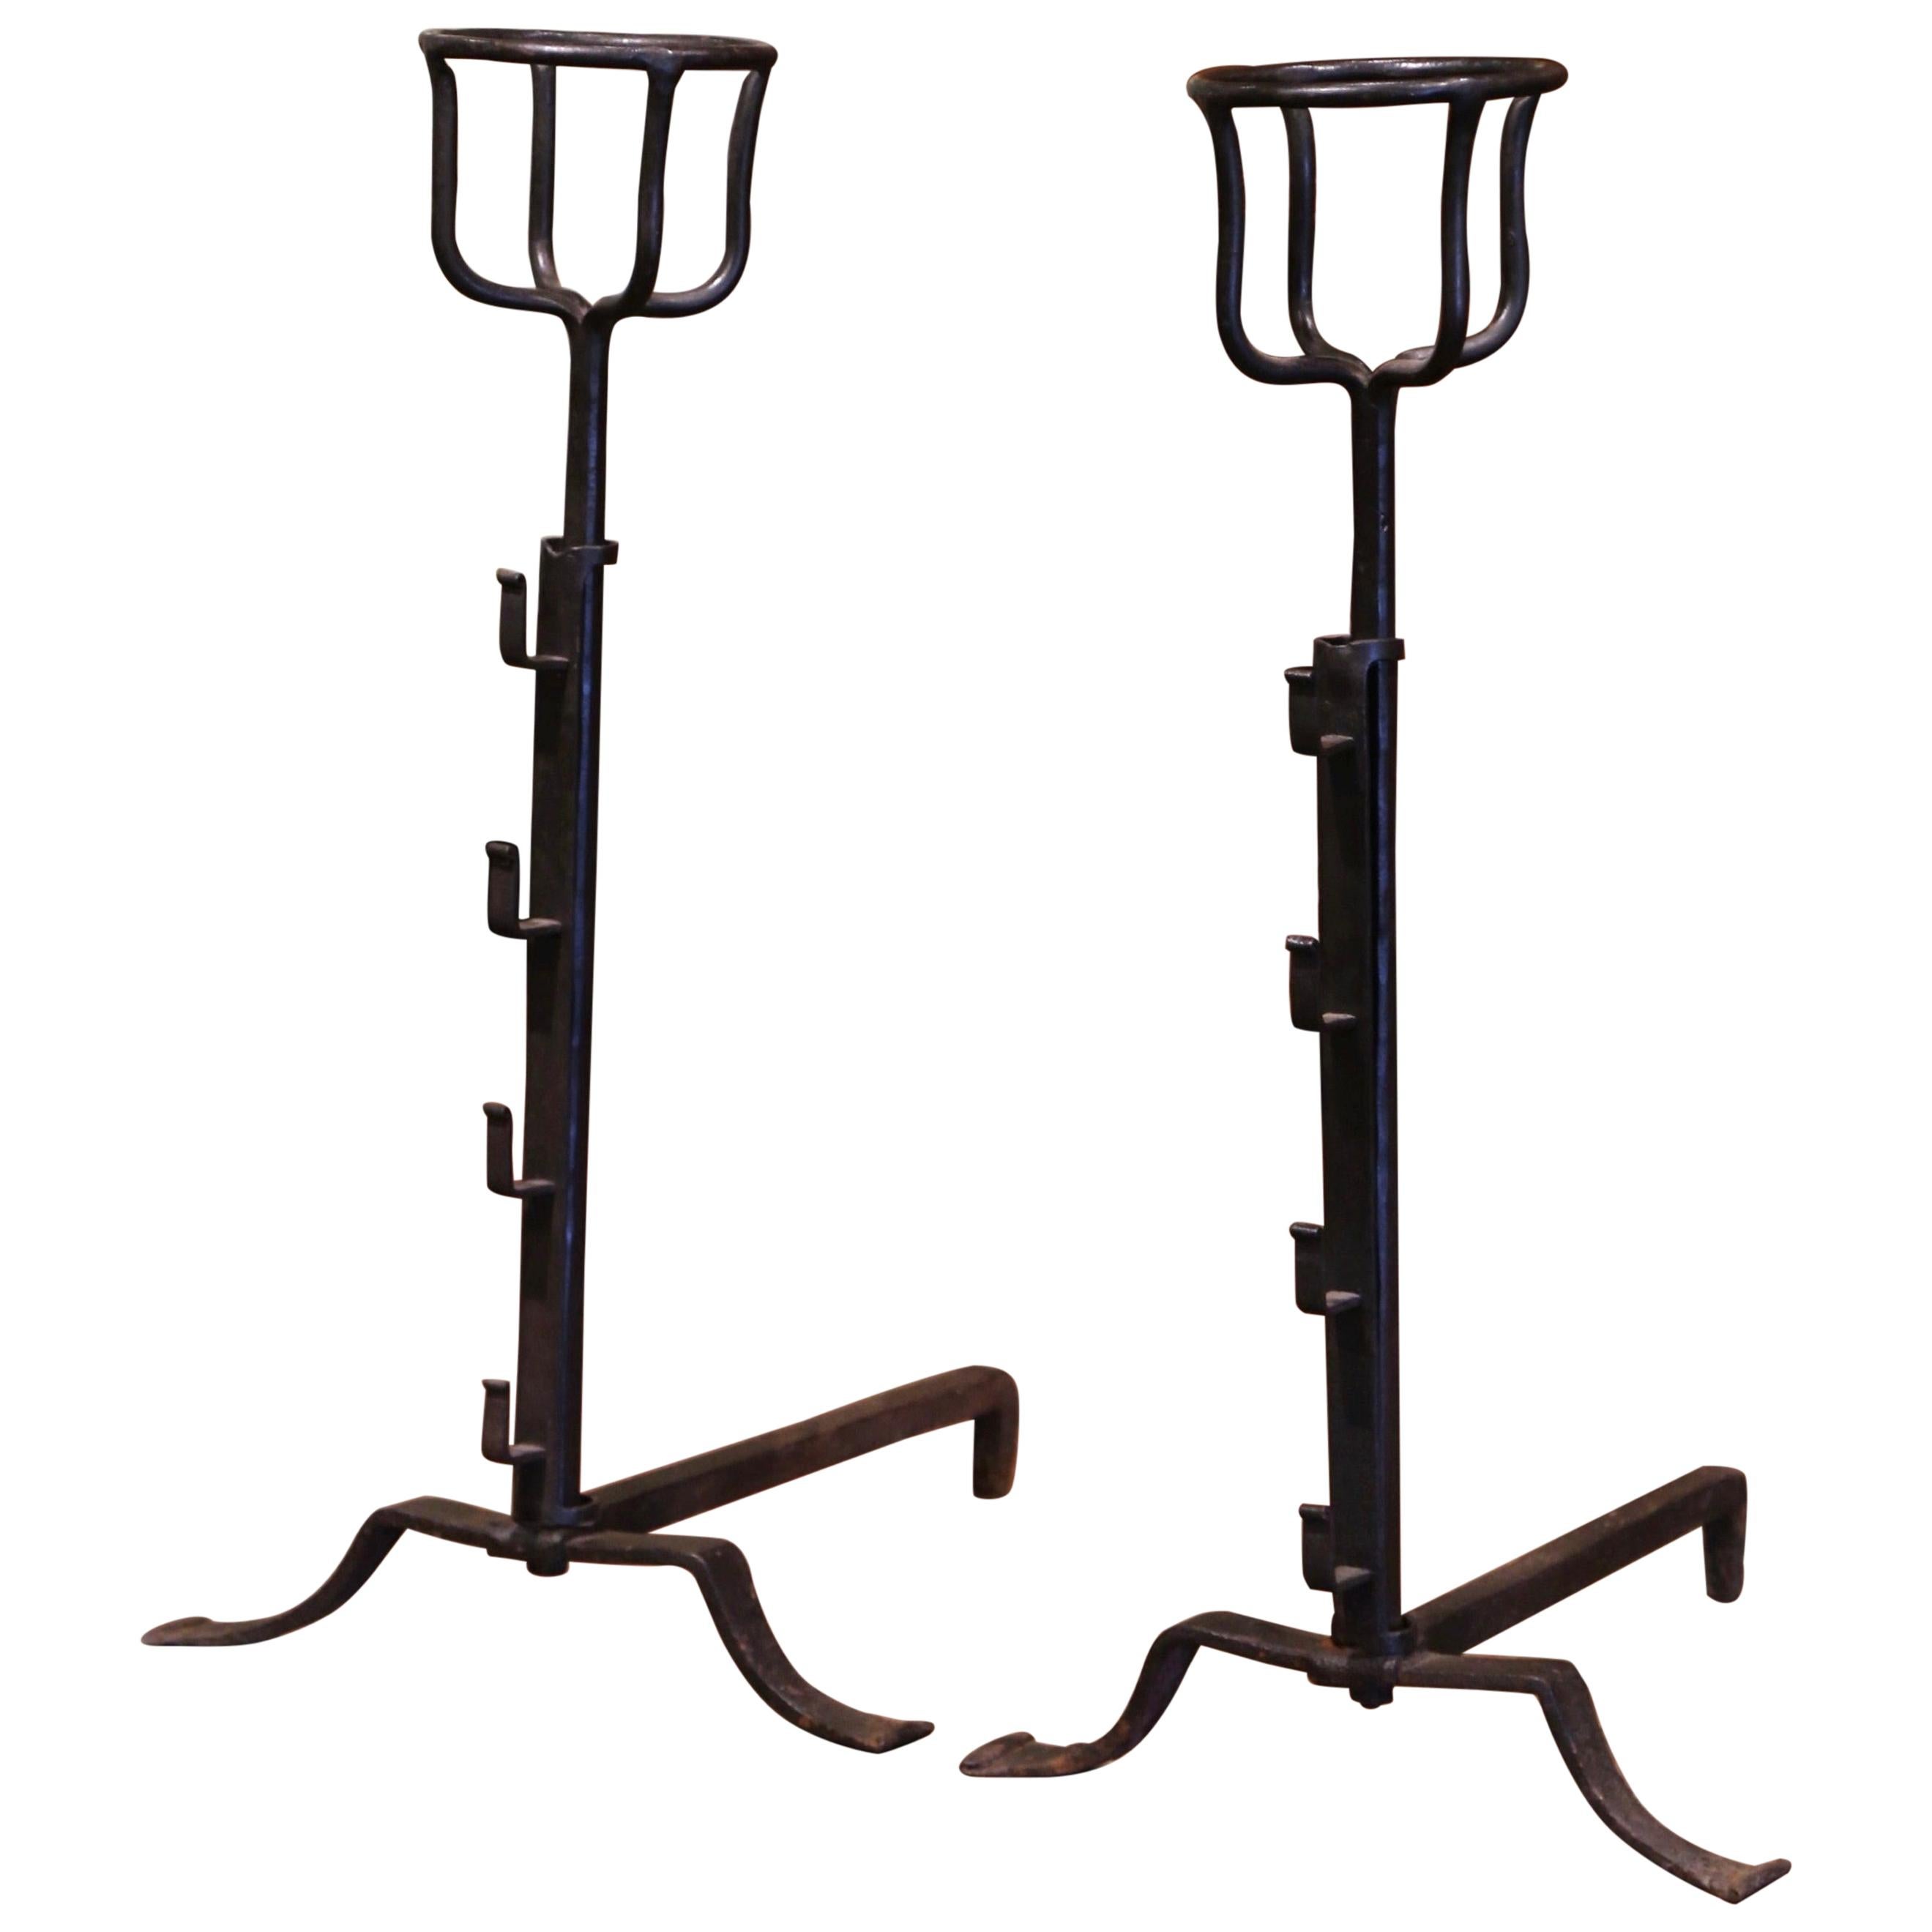 Pair of Mid-19th Century French Wrought Iron Andirons with Bowls For Sale